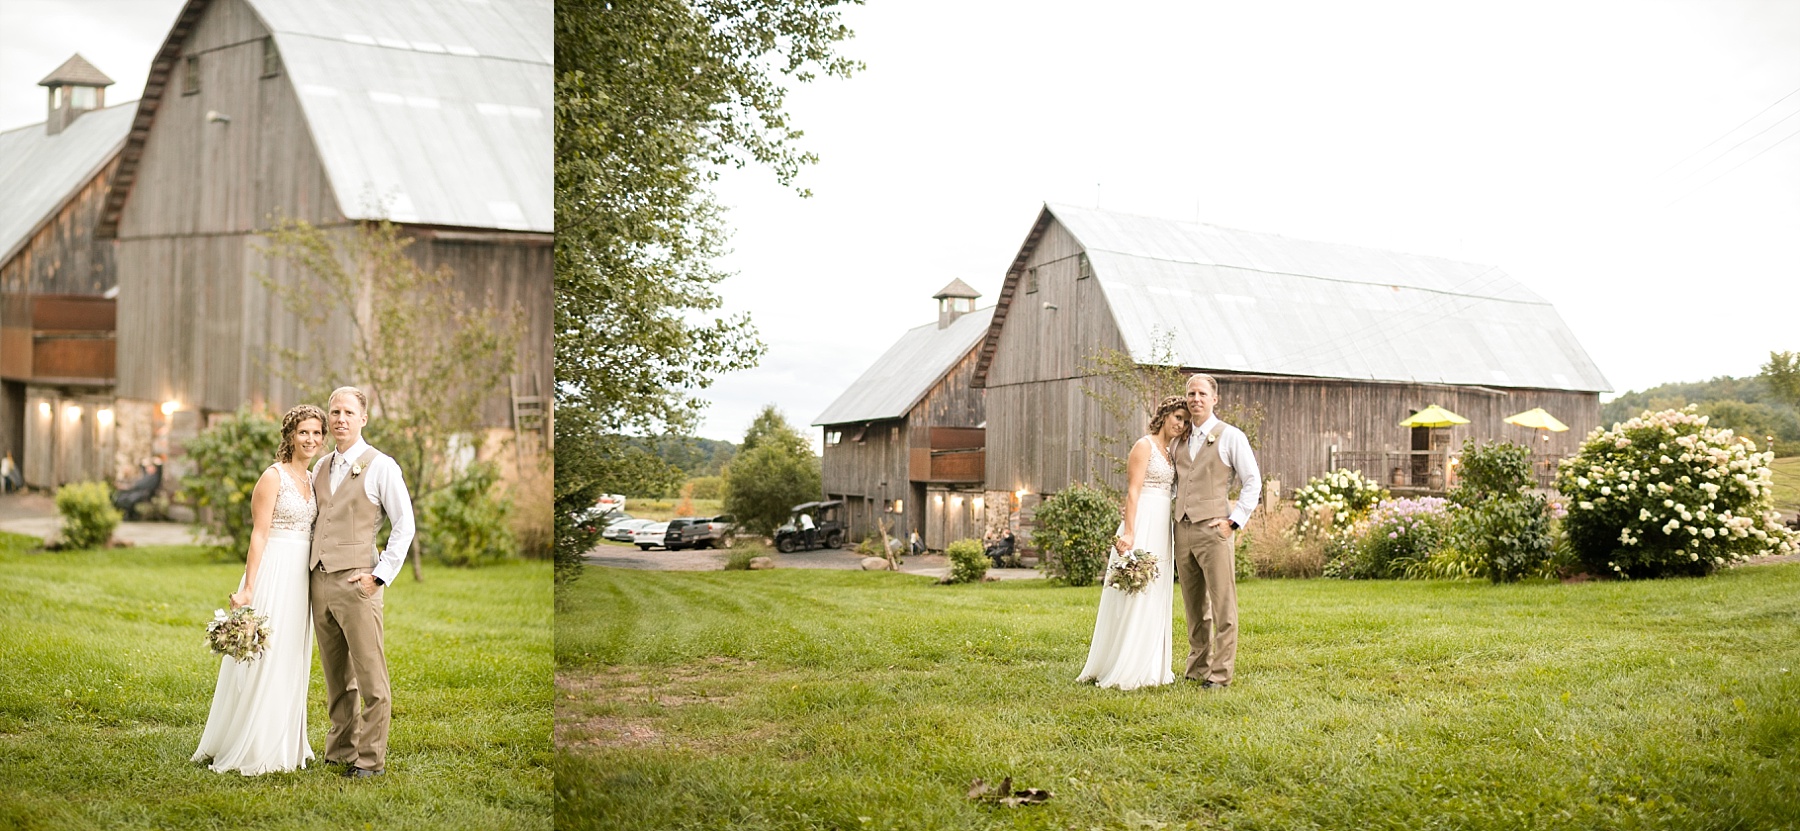 We ran for cover when the rain came, and ran for the fields when the sun peeked out.  Such a romantic wedding at The Enchanted Barn for Susan & Alex.